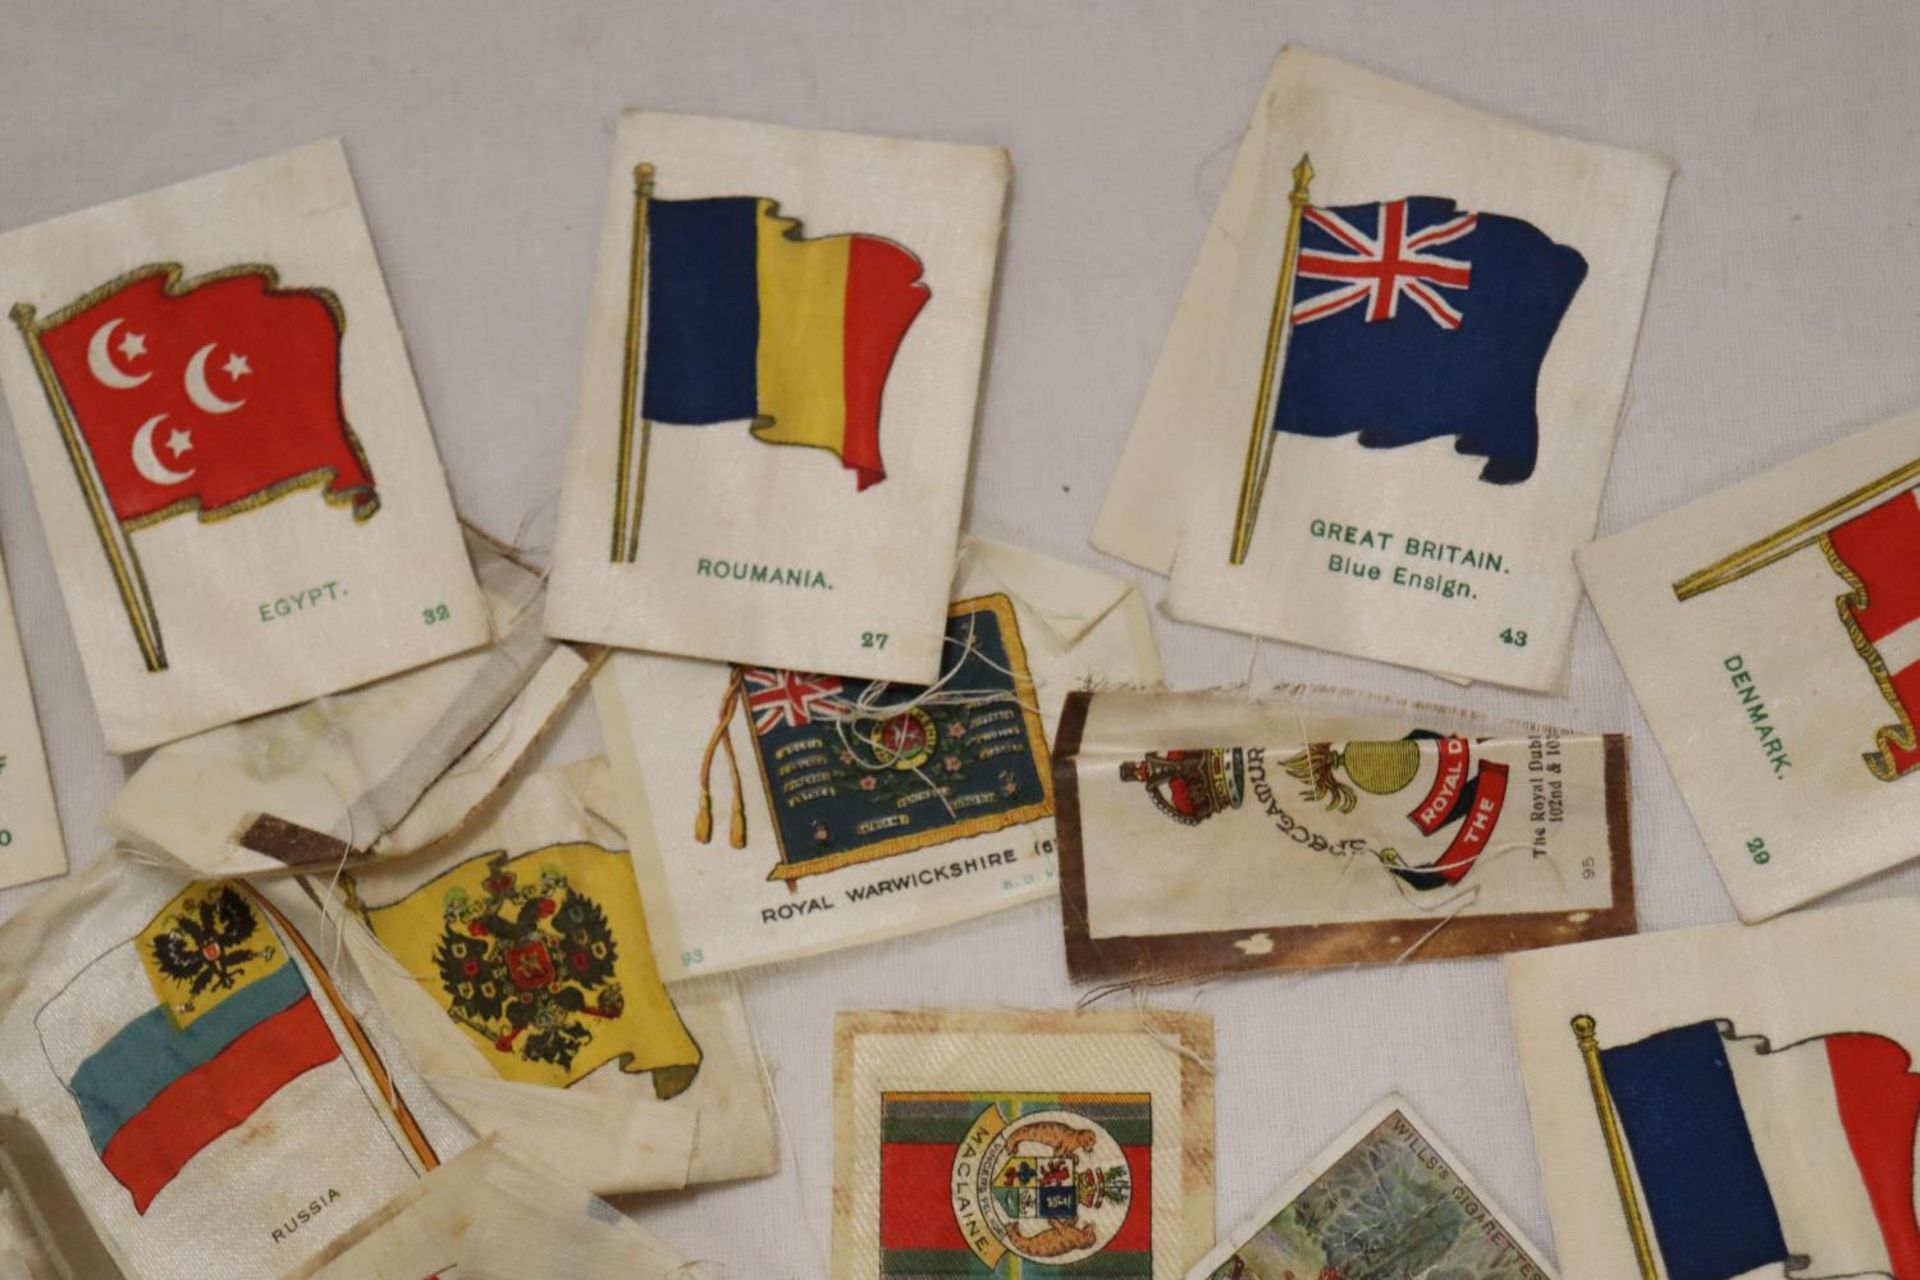 A BOX OF MURATTI CIGARETTES SILK CARDS CIRCA 1914, THE SILKS BEING FLAGS OF THE WORLD - Image 4 of 5